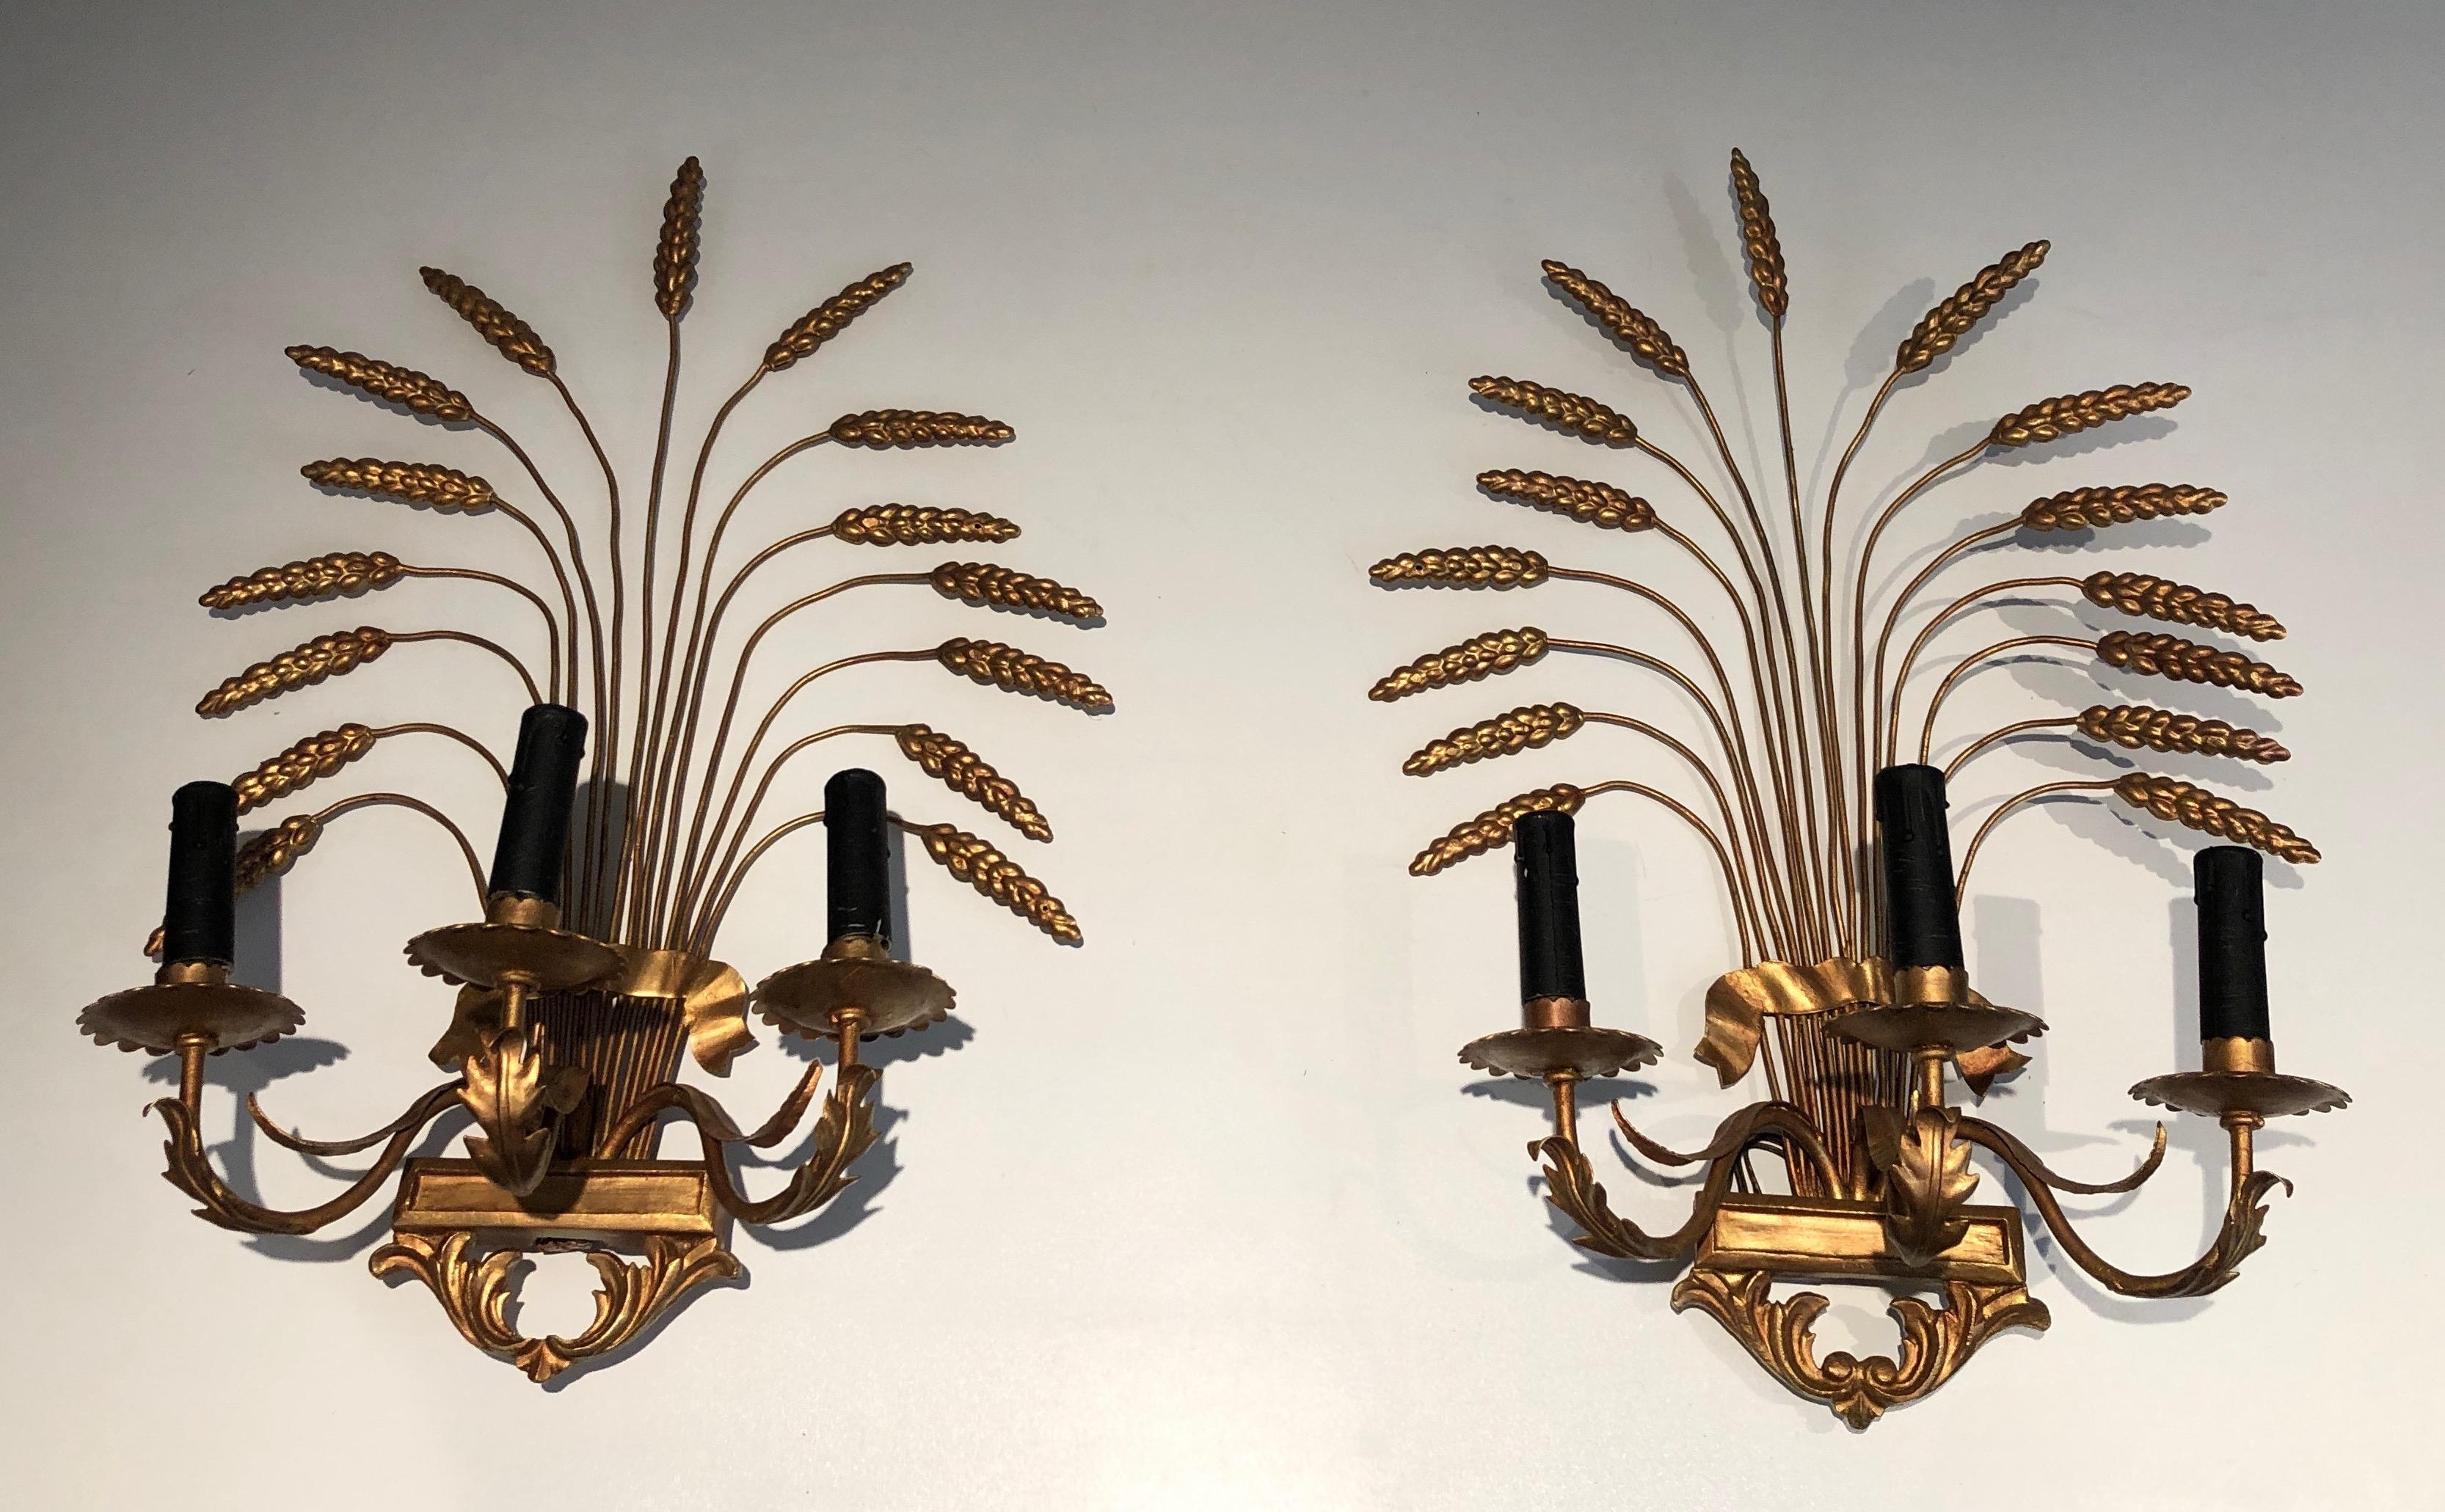 Pair of Decorative Gilt Wheat Wall Sconces, in the Style of Coco Channel 4